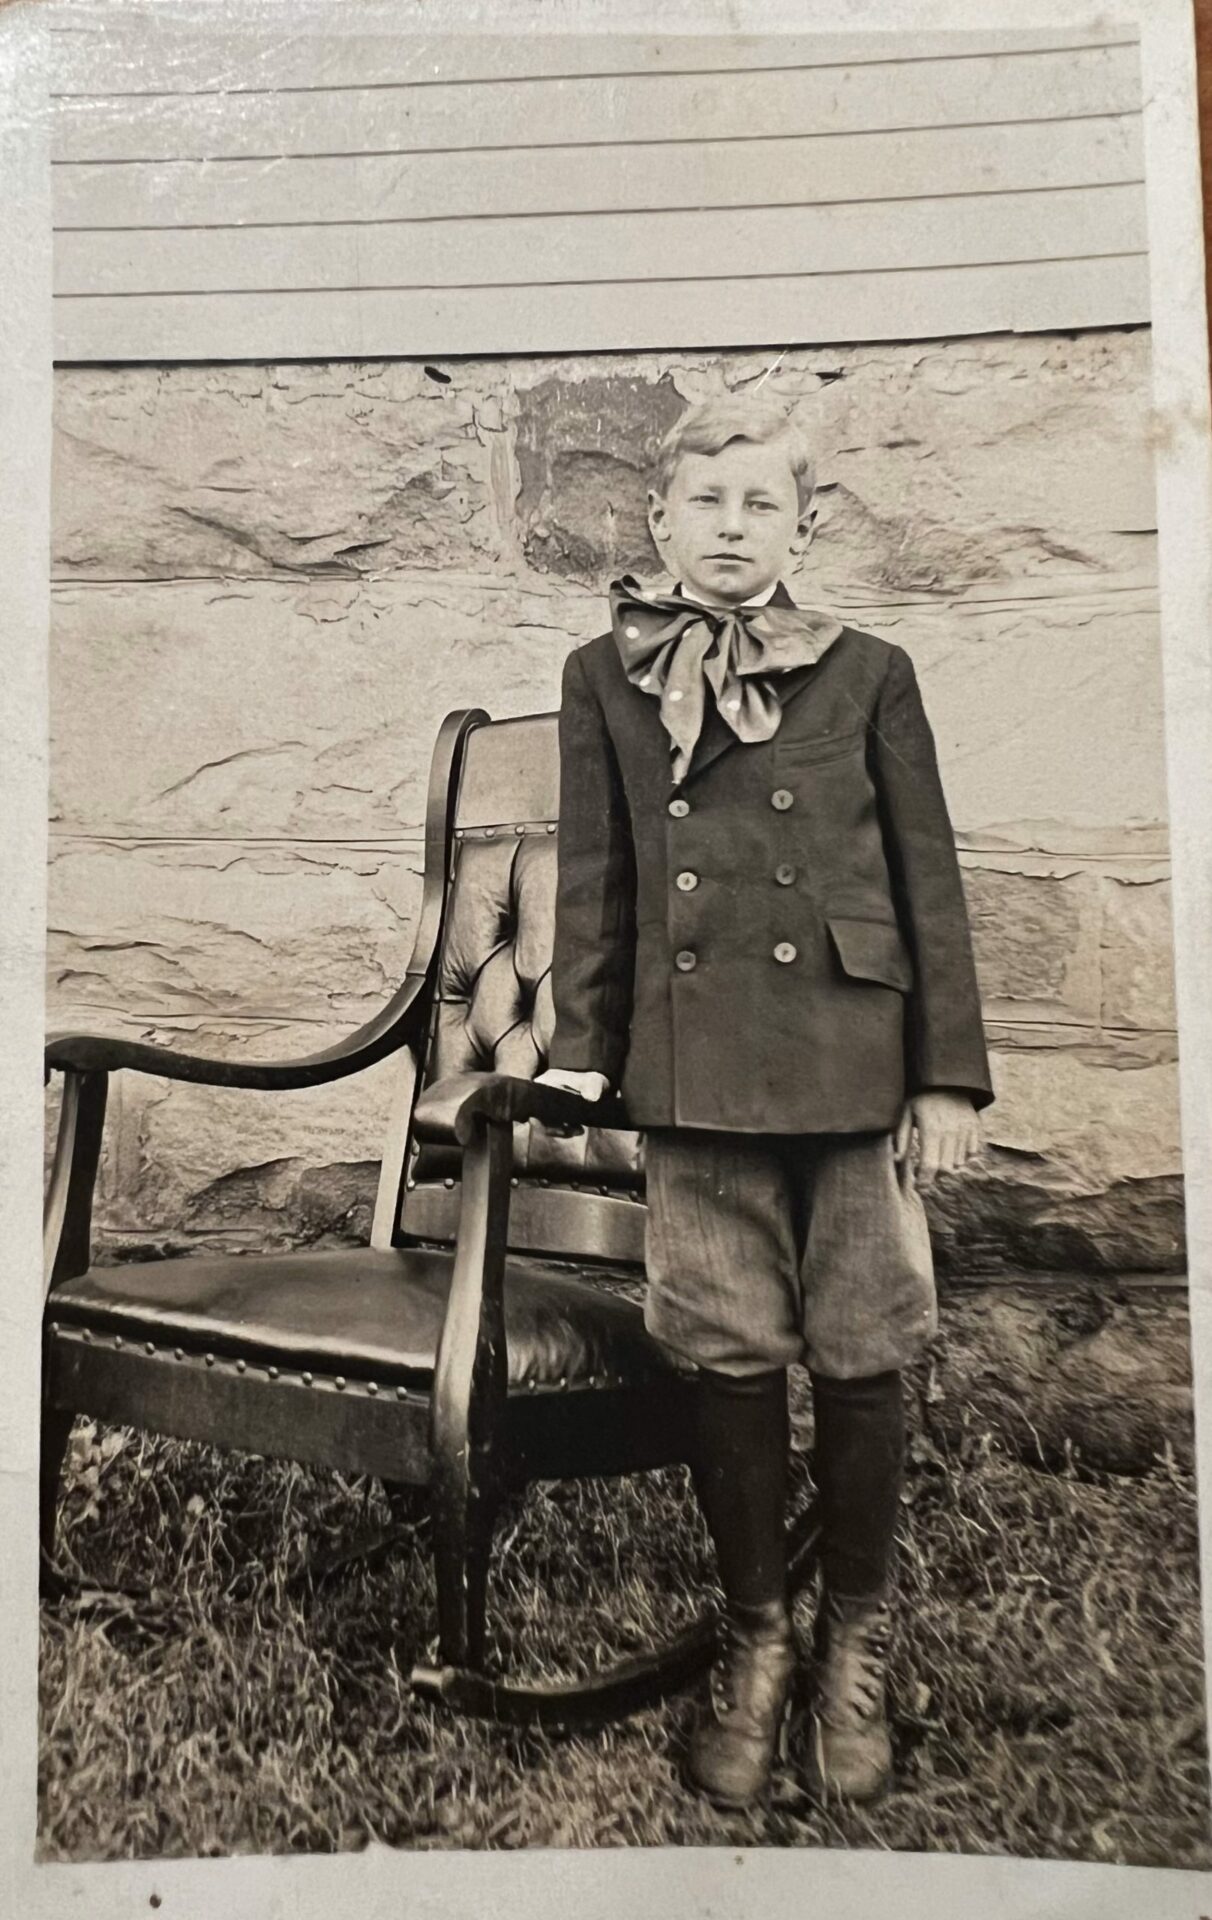 A black and white photograph taken in the early 1900s of William Austin Mearns as a child